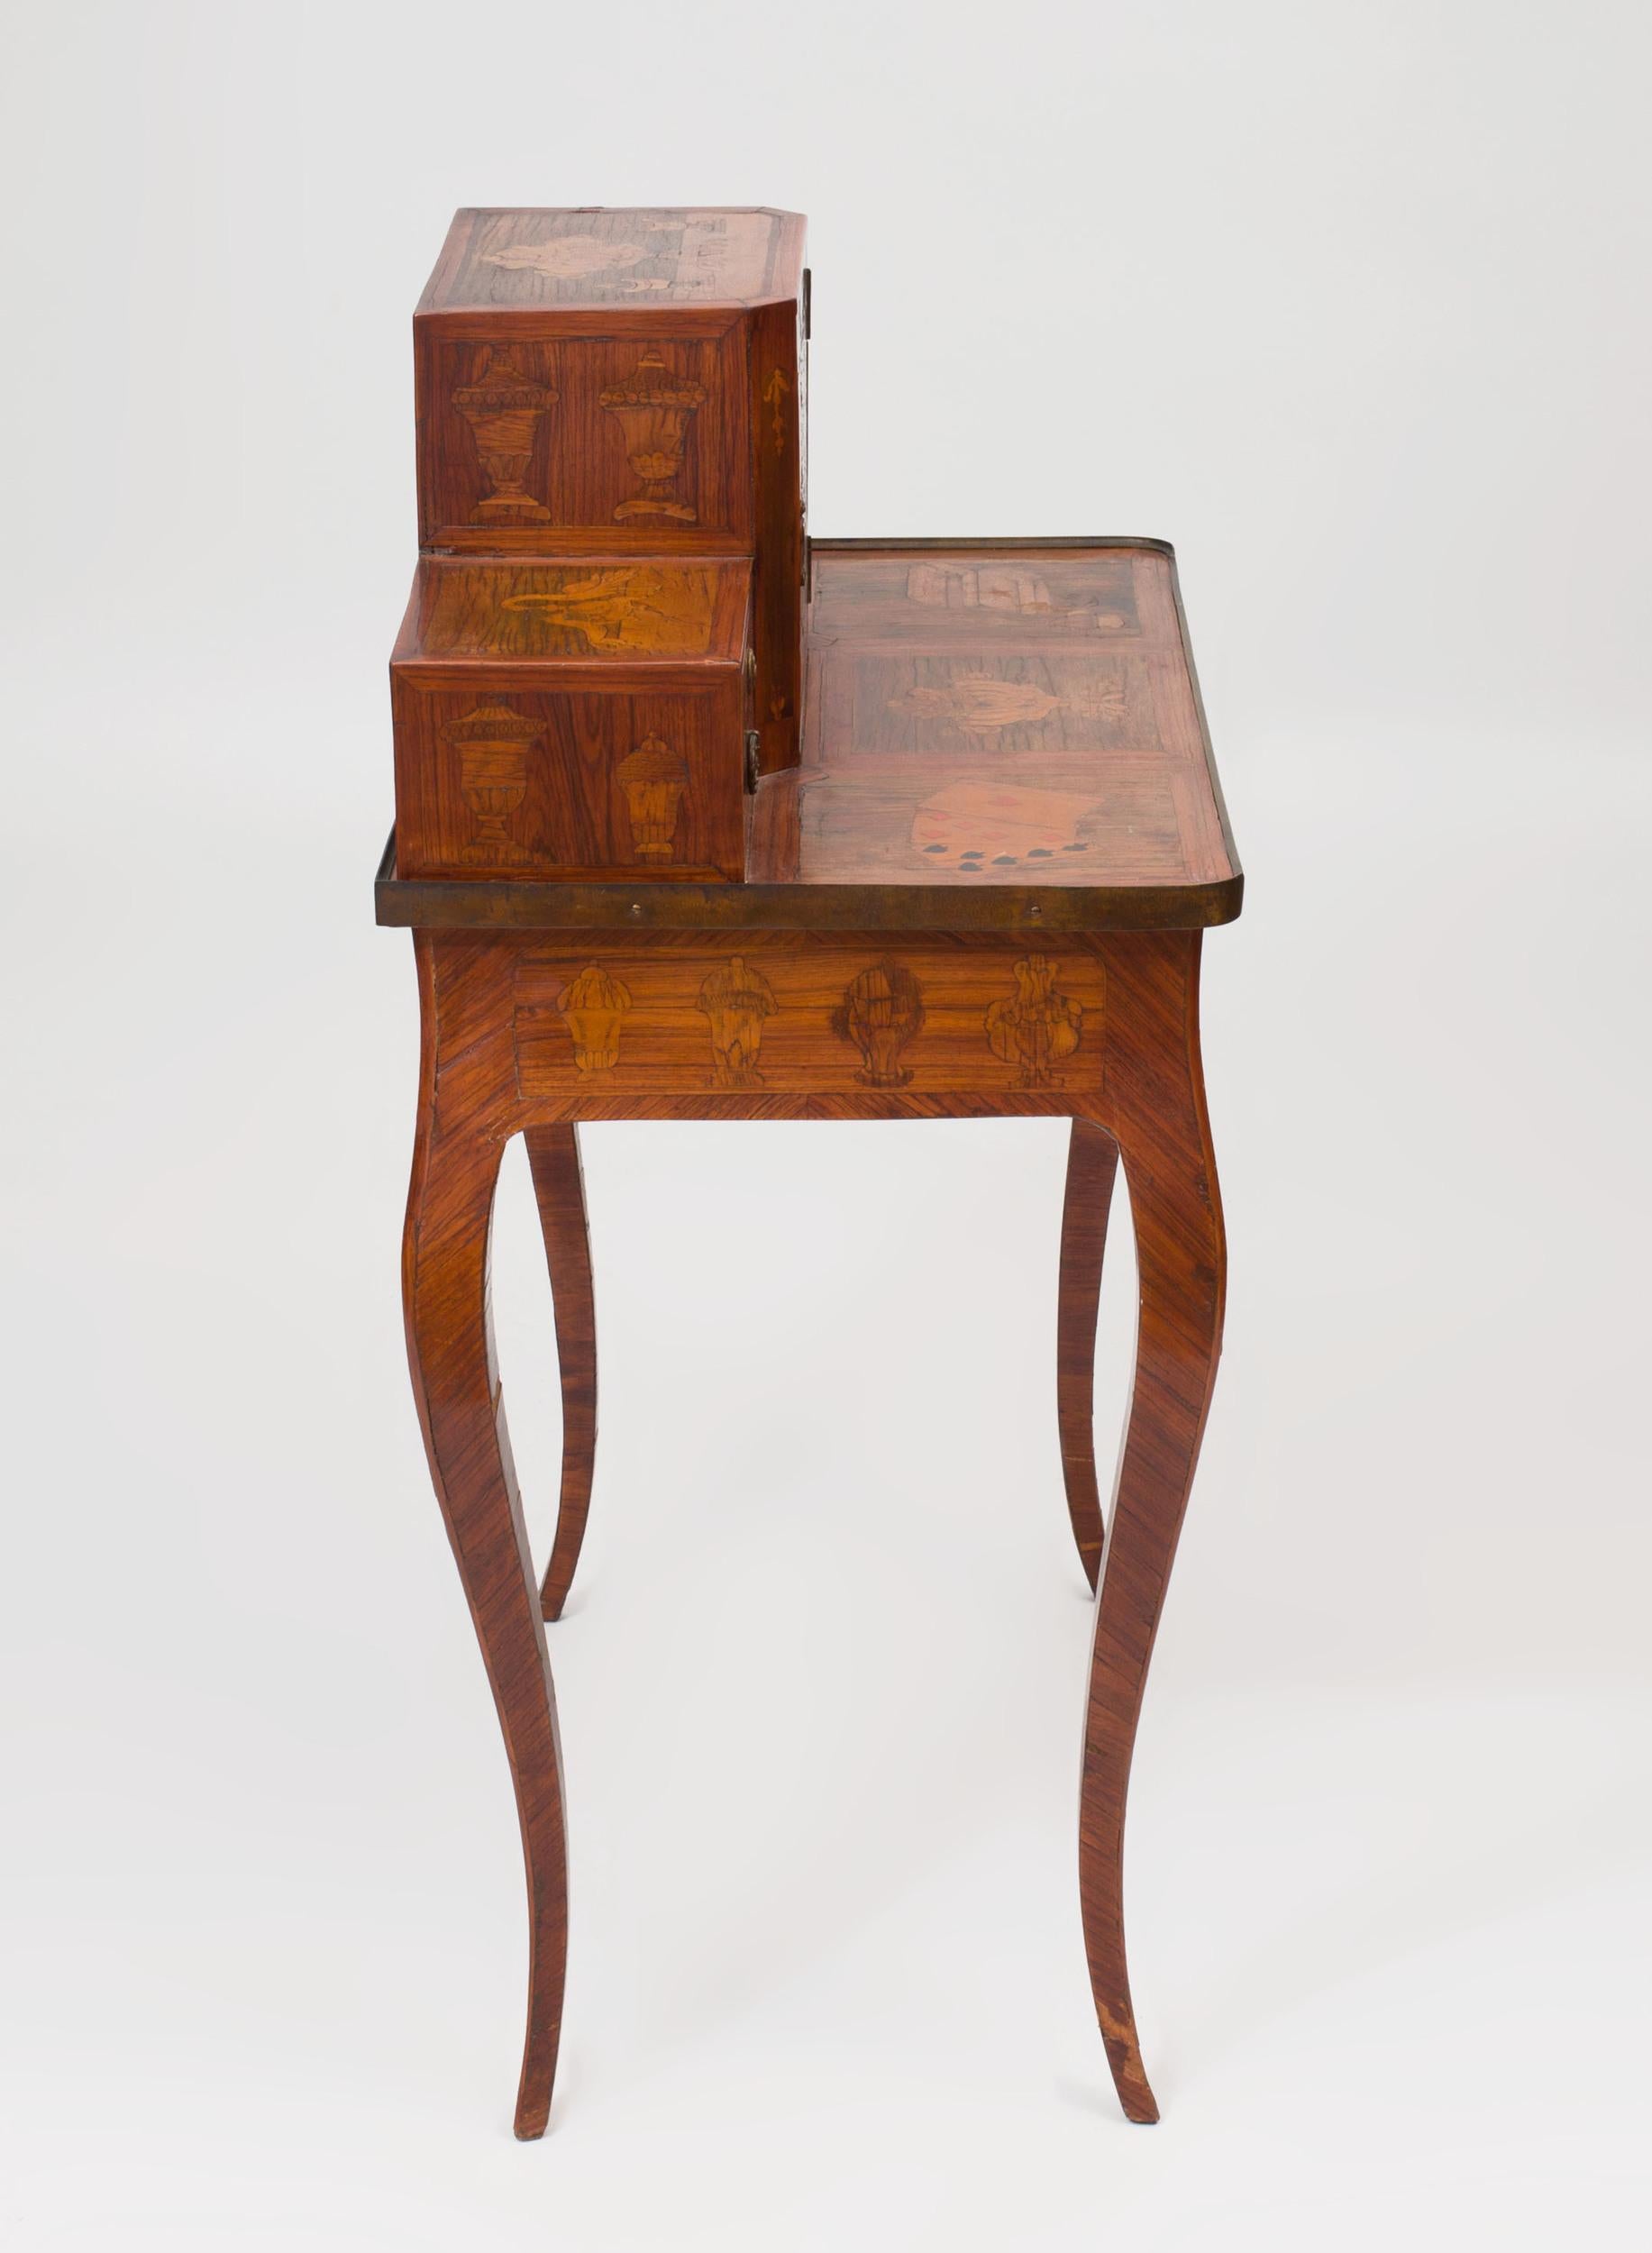 Louis XV Provincial Bon du Jour (ladies writing desk) with fruitwood and kingwood pictorial marquetry inlay depicting a hand of cards, urns, books and dogs and a goose.